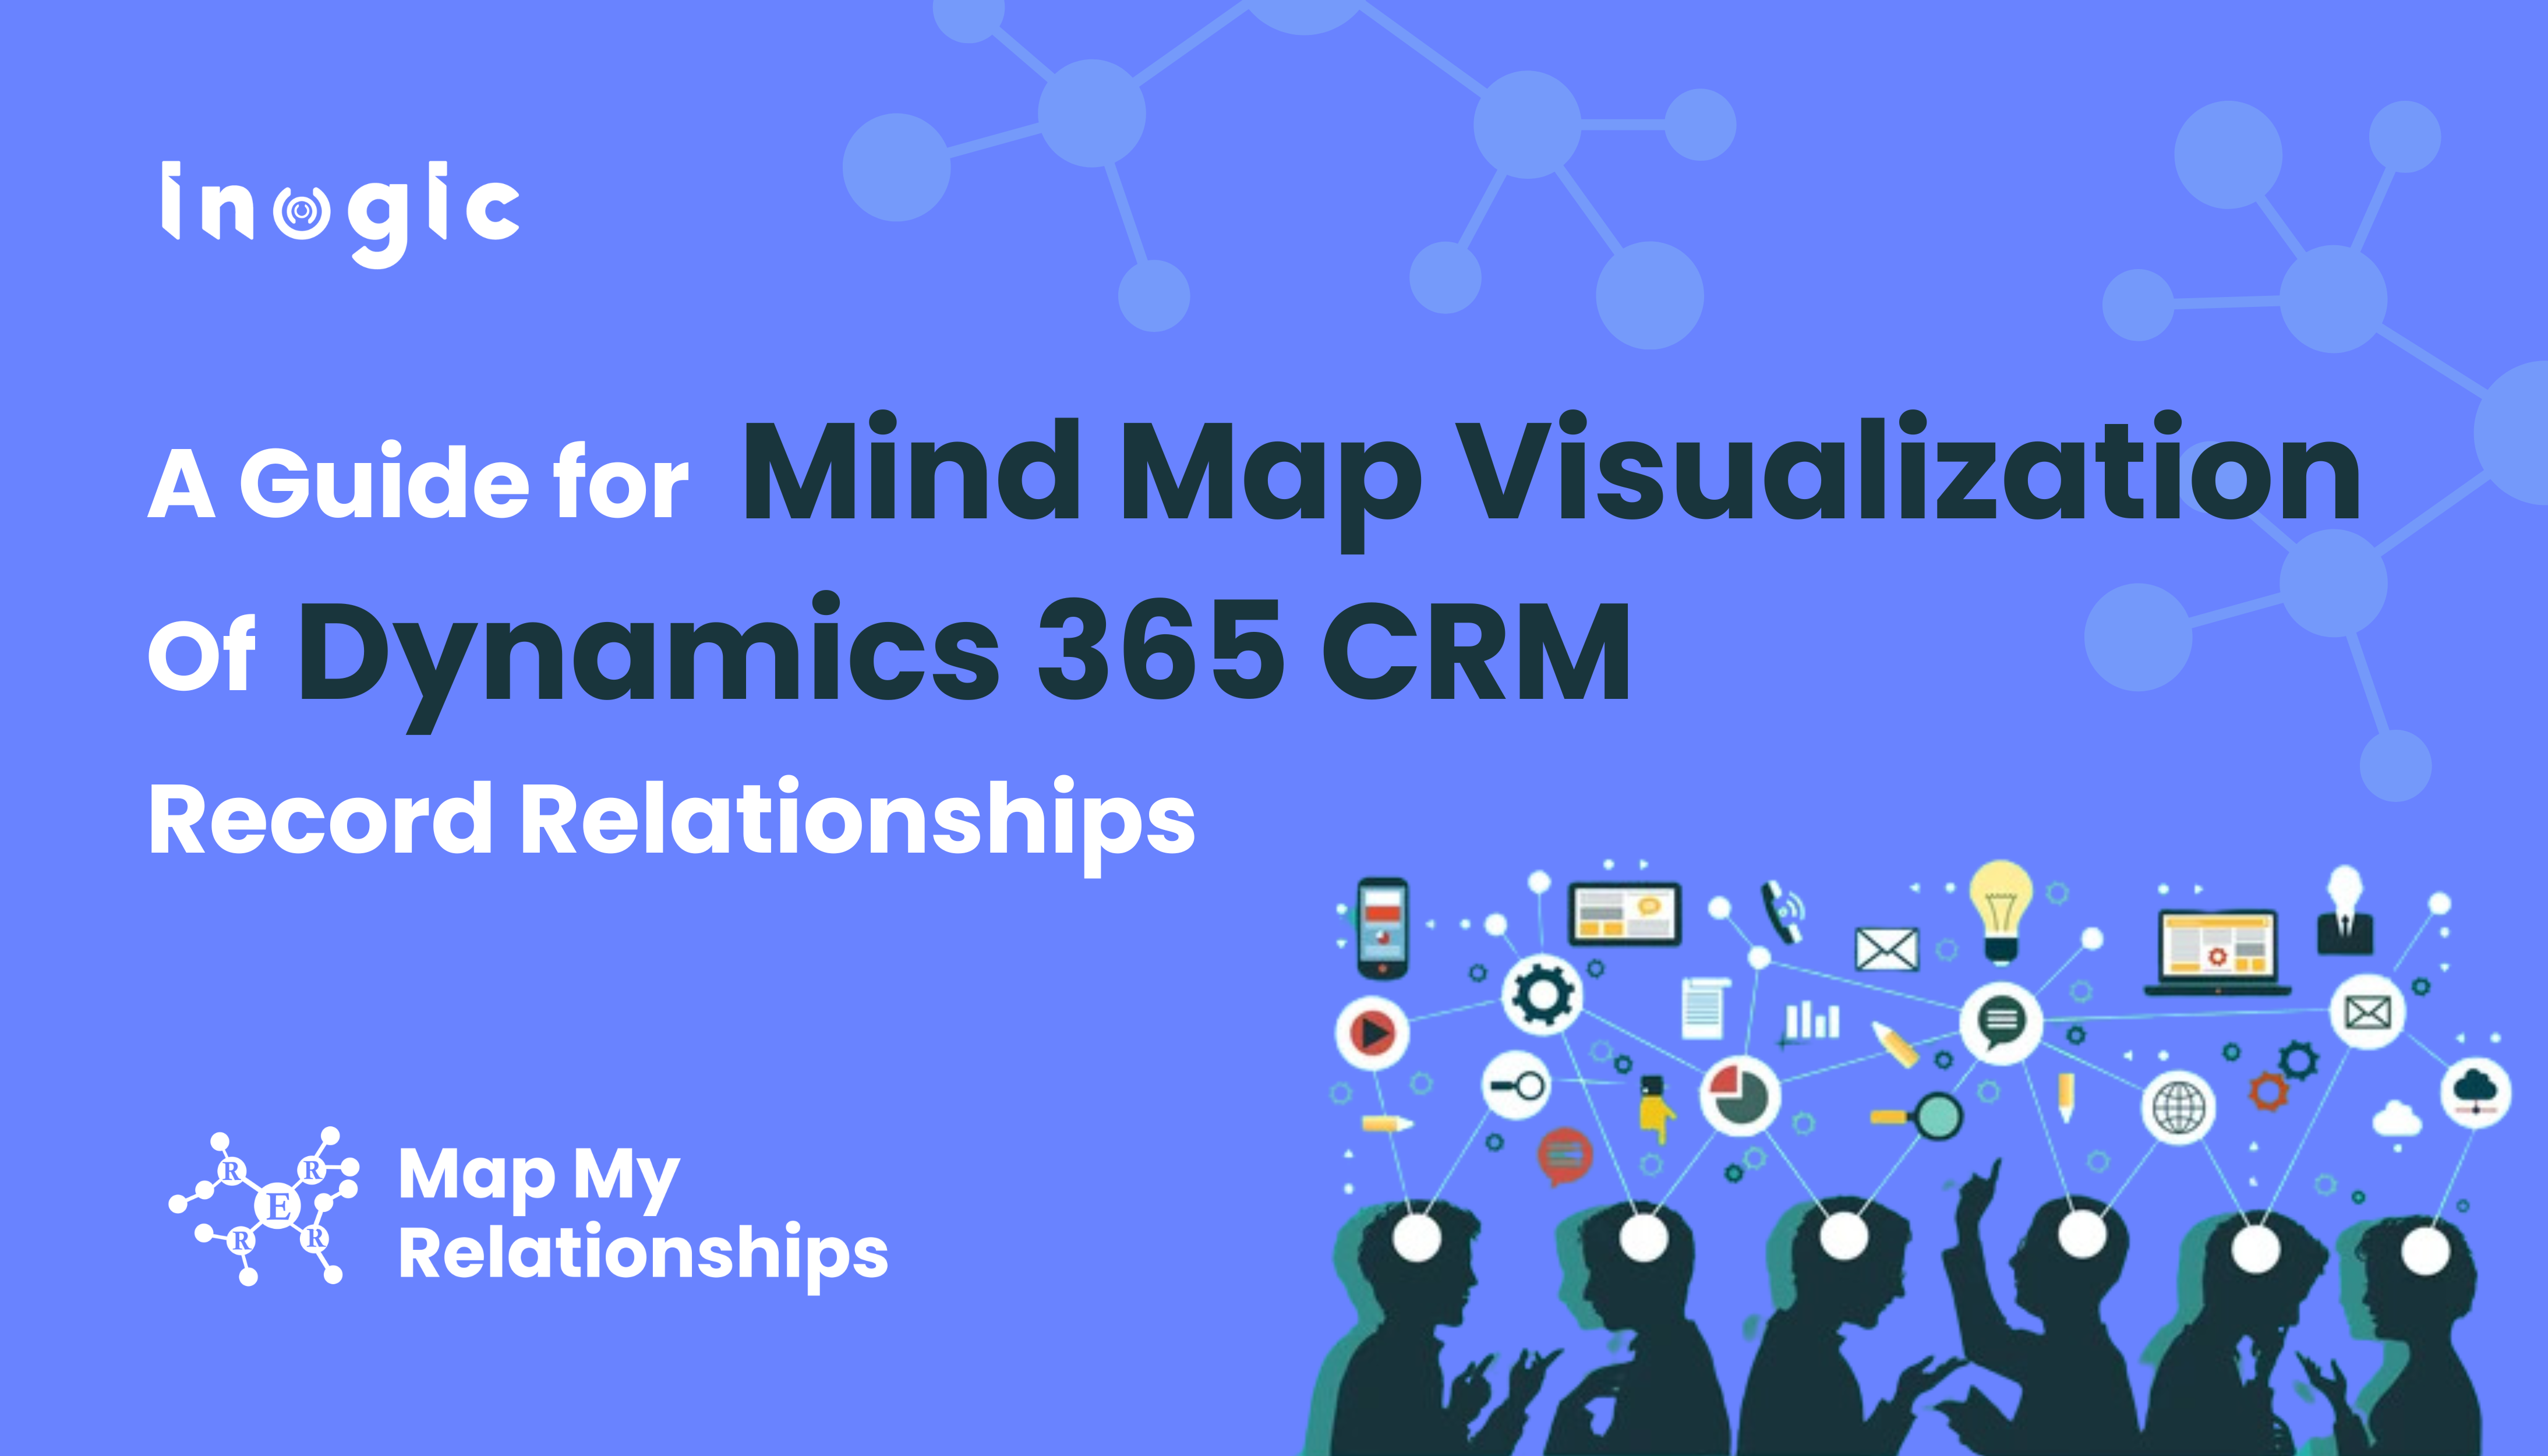 A Guide for Mind Map visualization of Dynamics 365 CRM Record Relationships